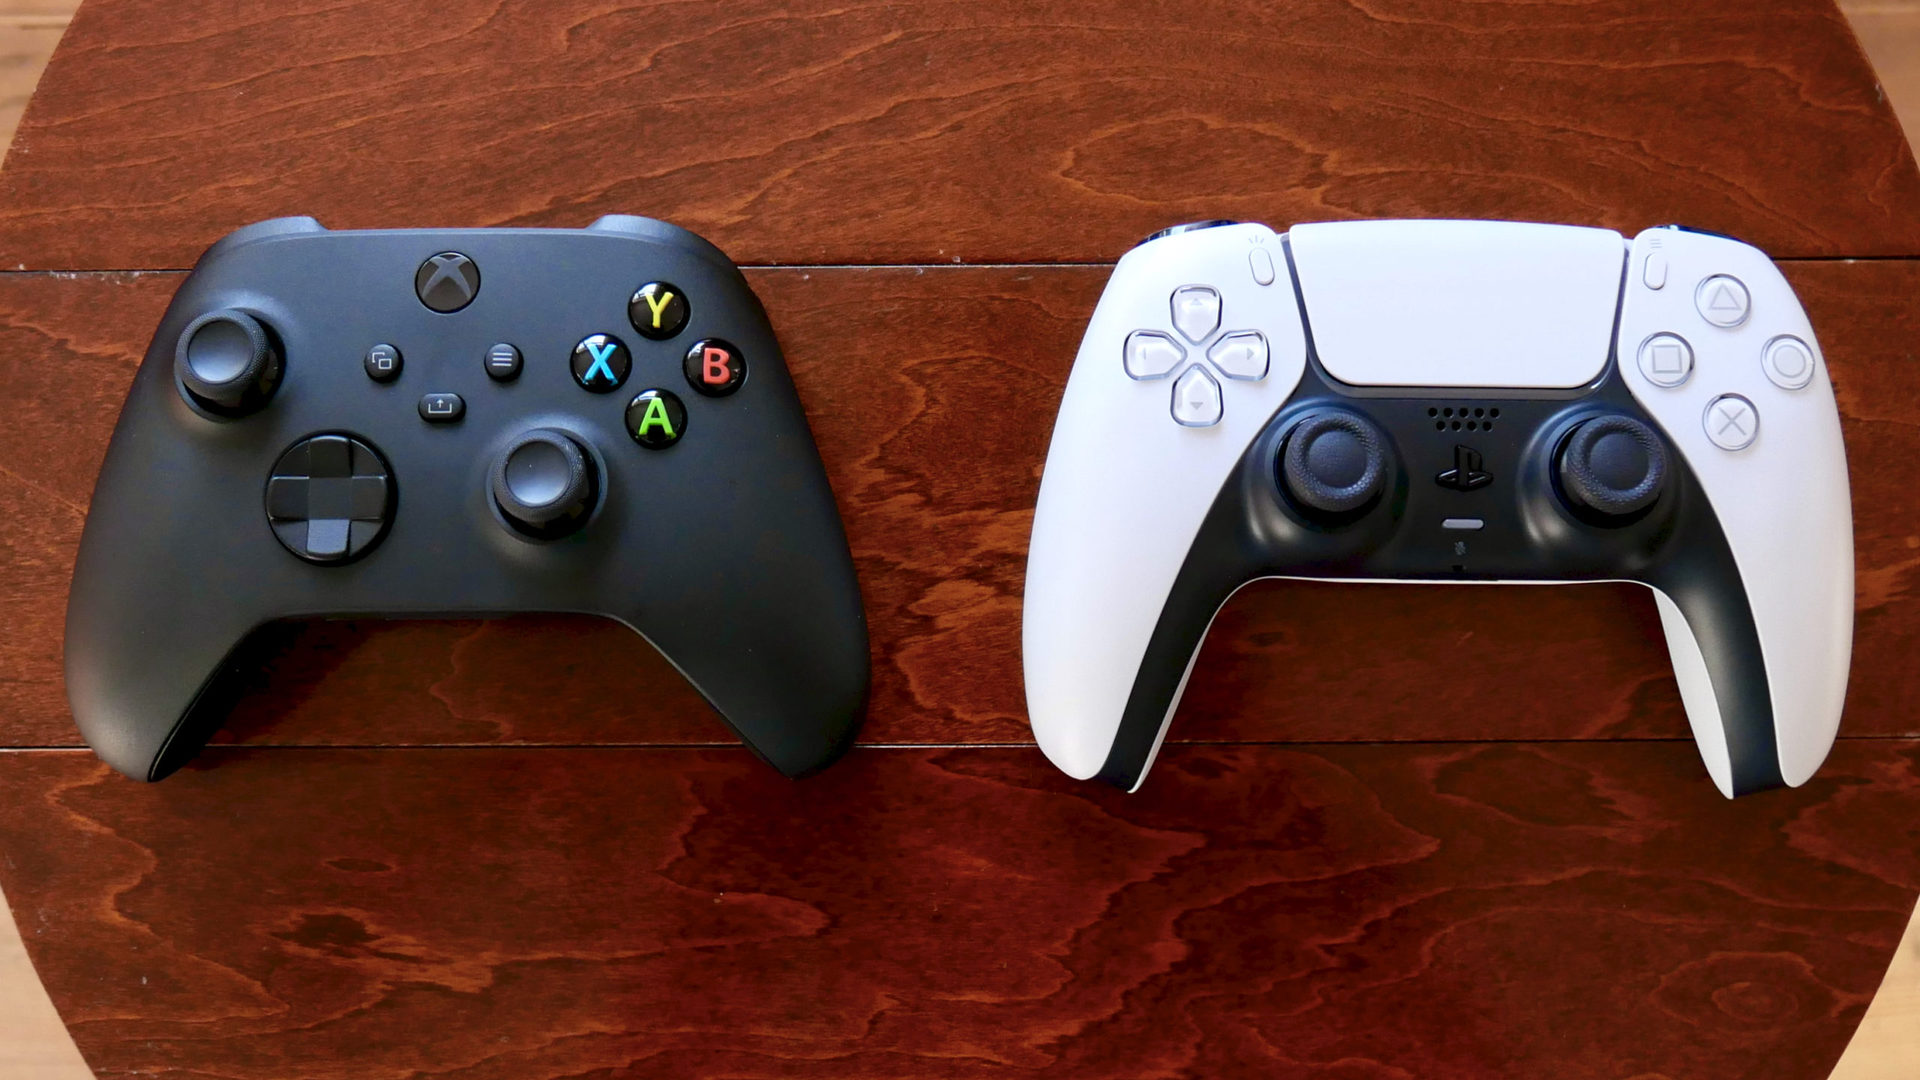 The Bluetooth controllers for PC, and more!